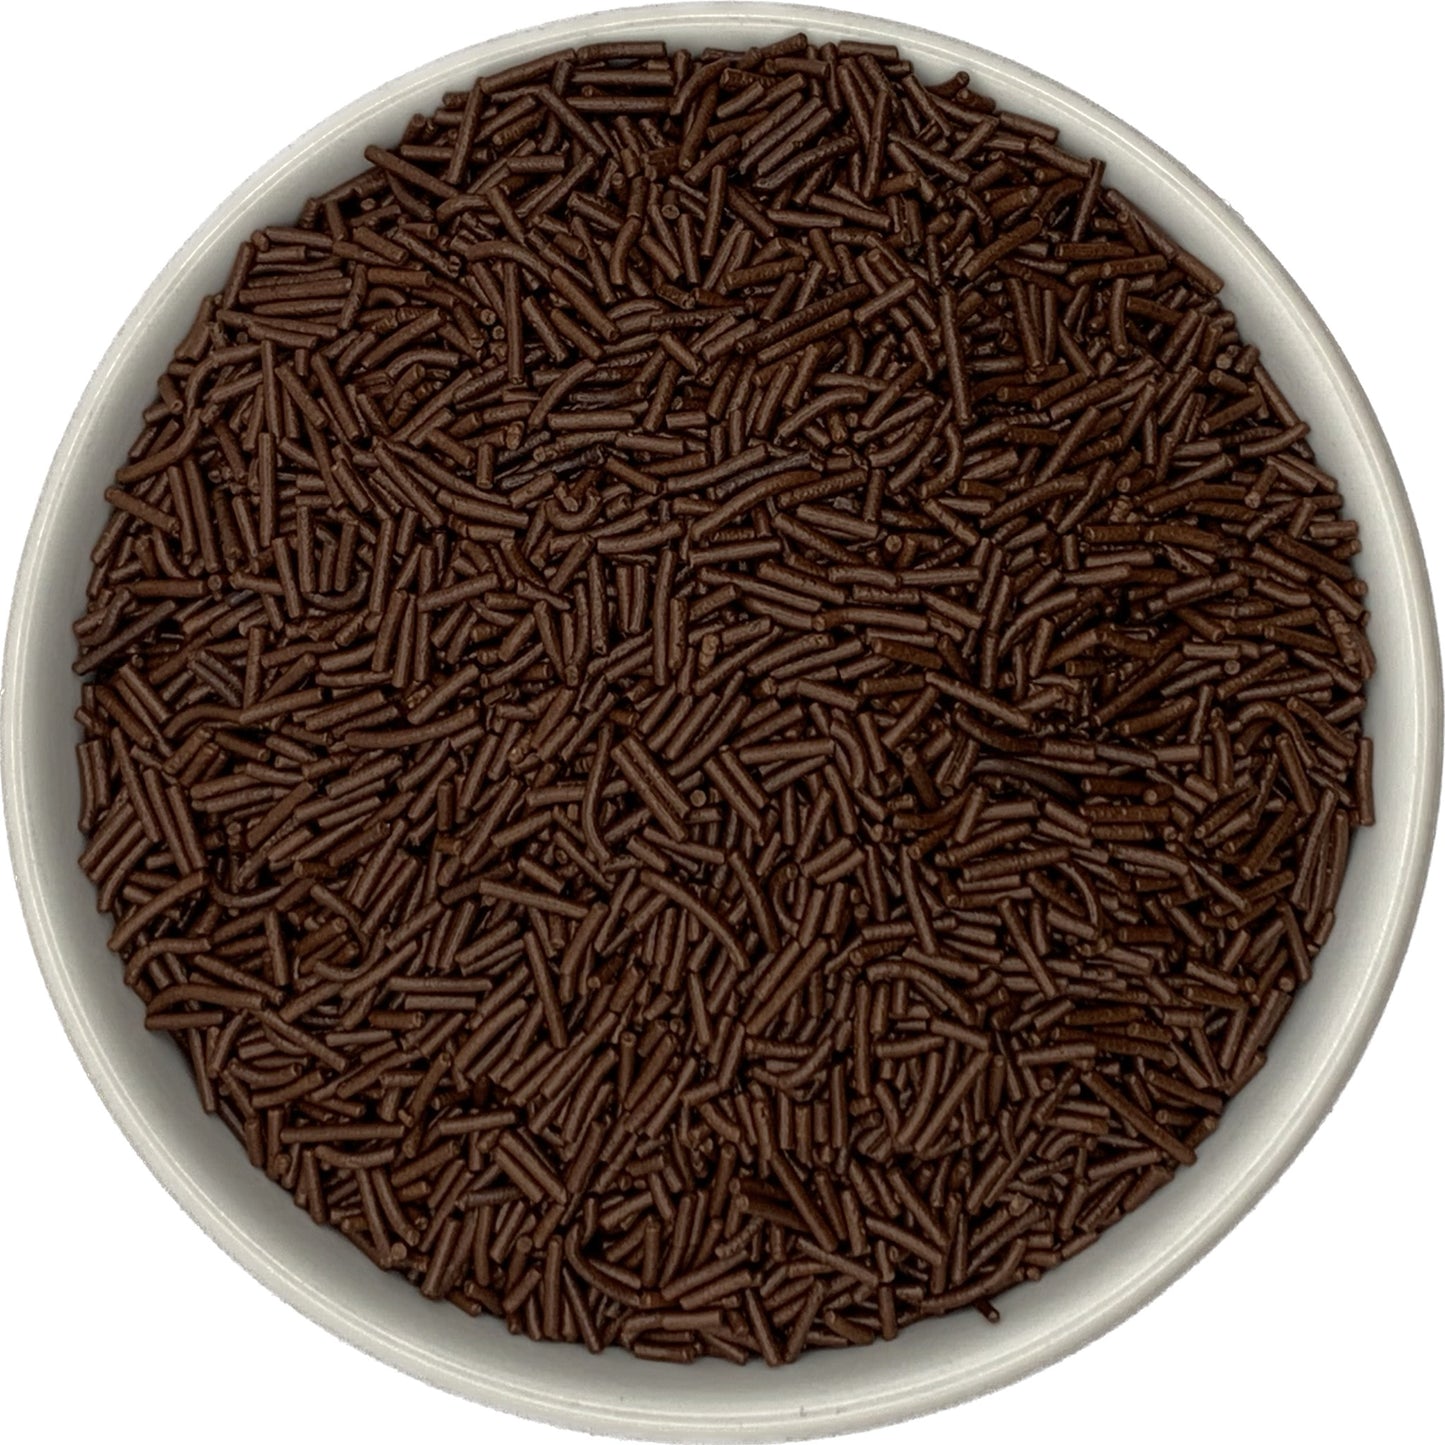 Guittard Decoratiff Chocolate Sprinkles in a small bowl